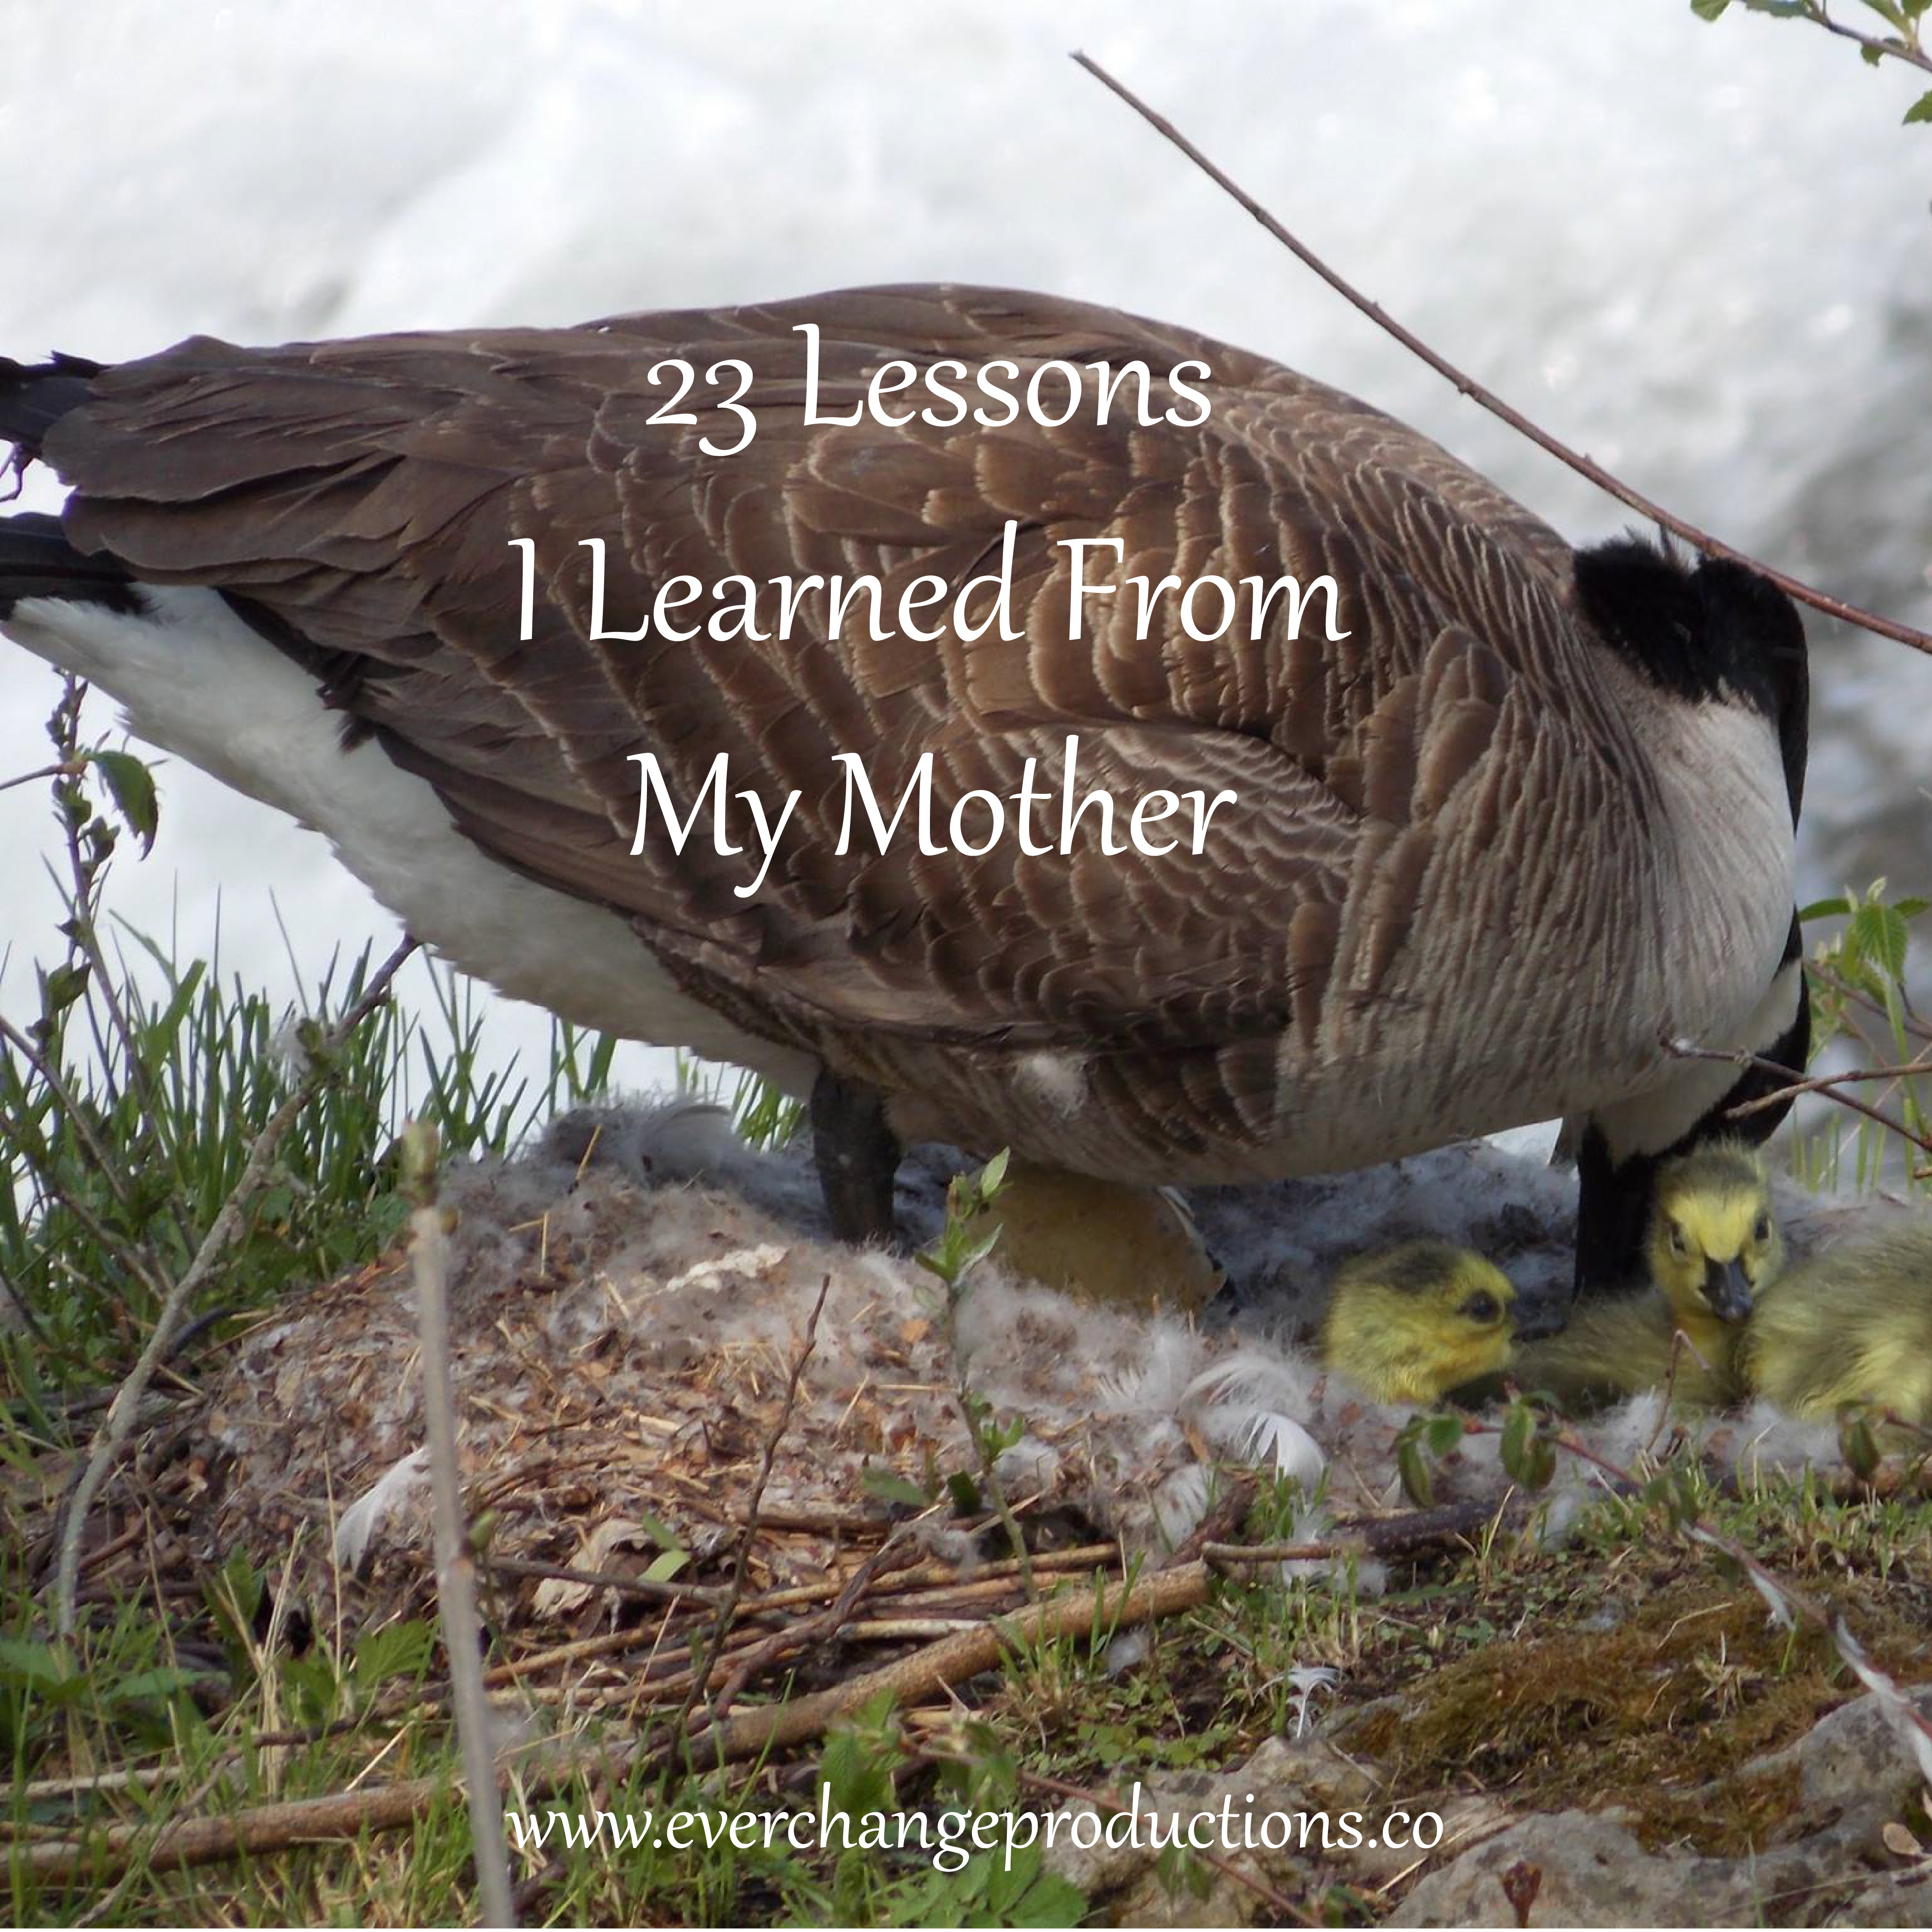 23 Lessons My Mother Taught Me- One for each year I've been alive